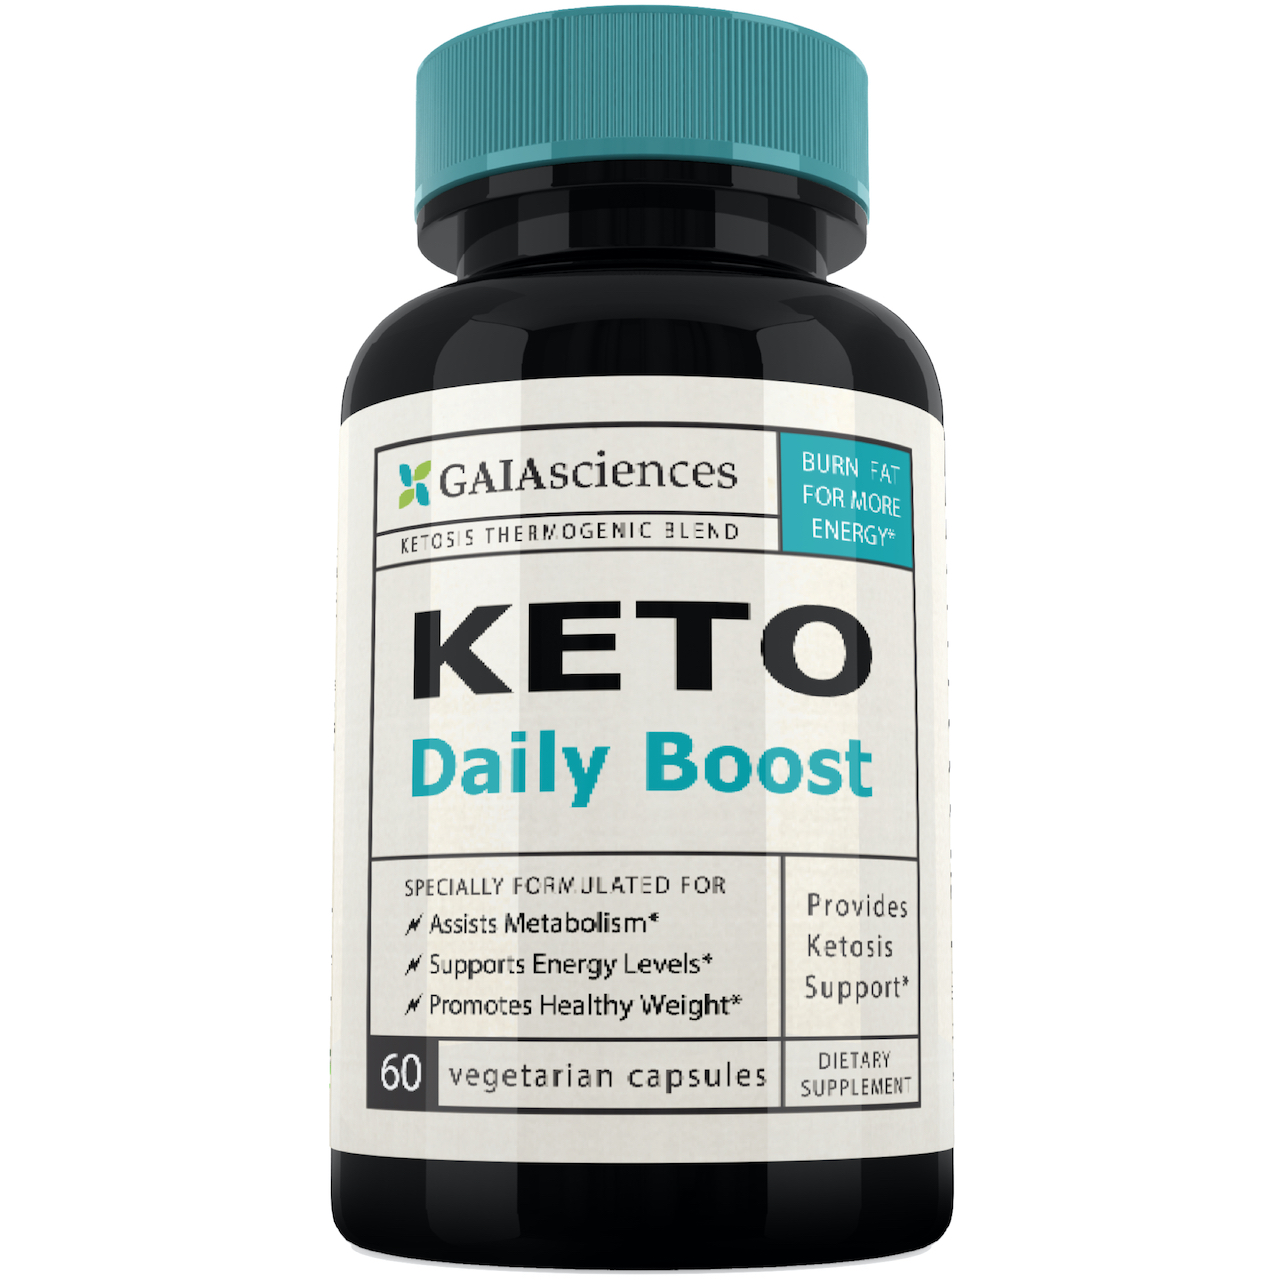 keto diet pills metabolism energy booster daily boost pre-workout supplements